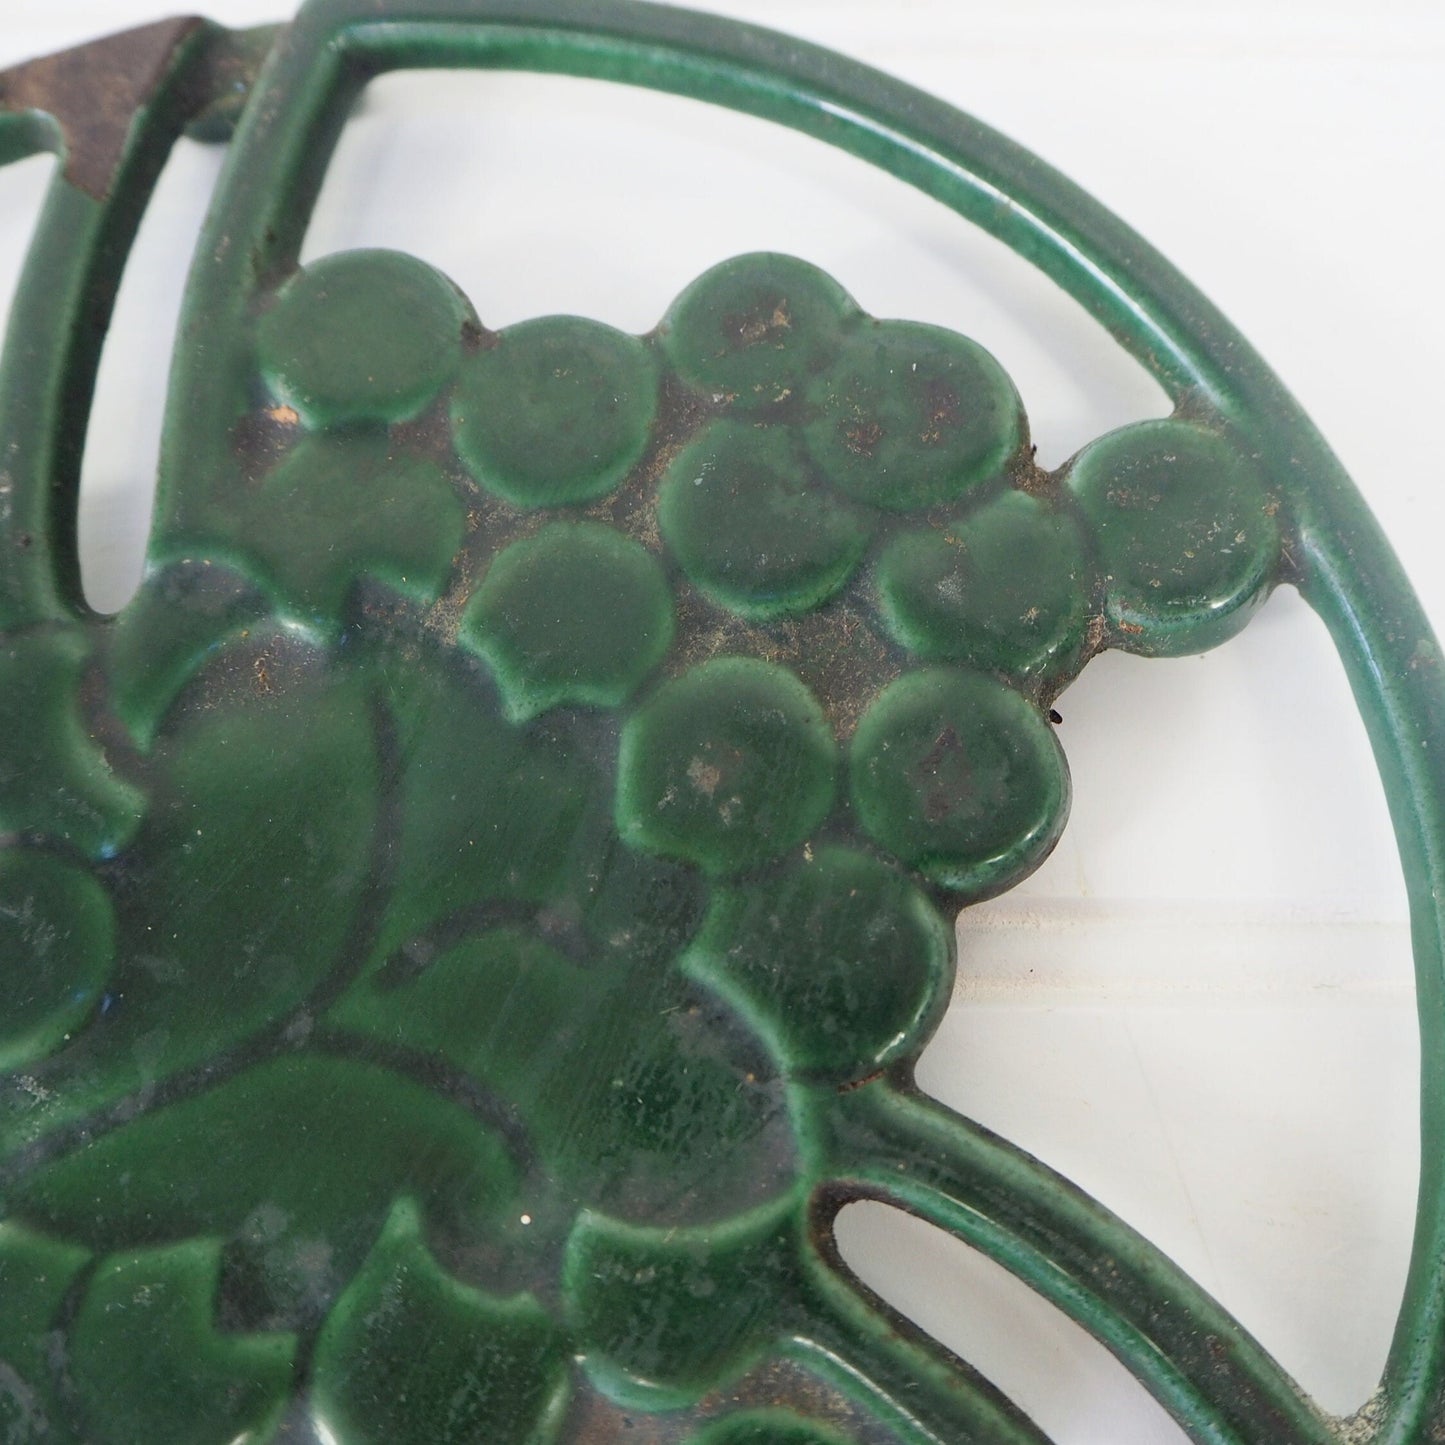 French vintage trivet Cast iron Rare green grape design Round ornate decorative pot stand Pan holder Country Kitchen Worktop protector Gift